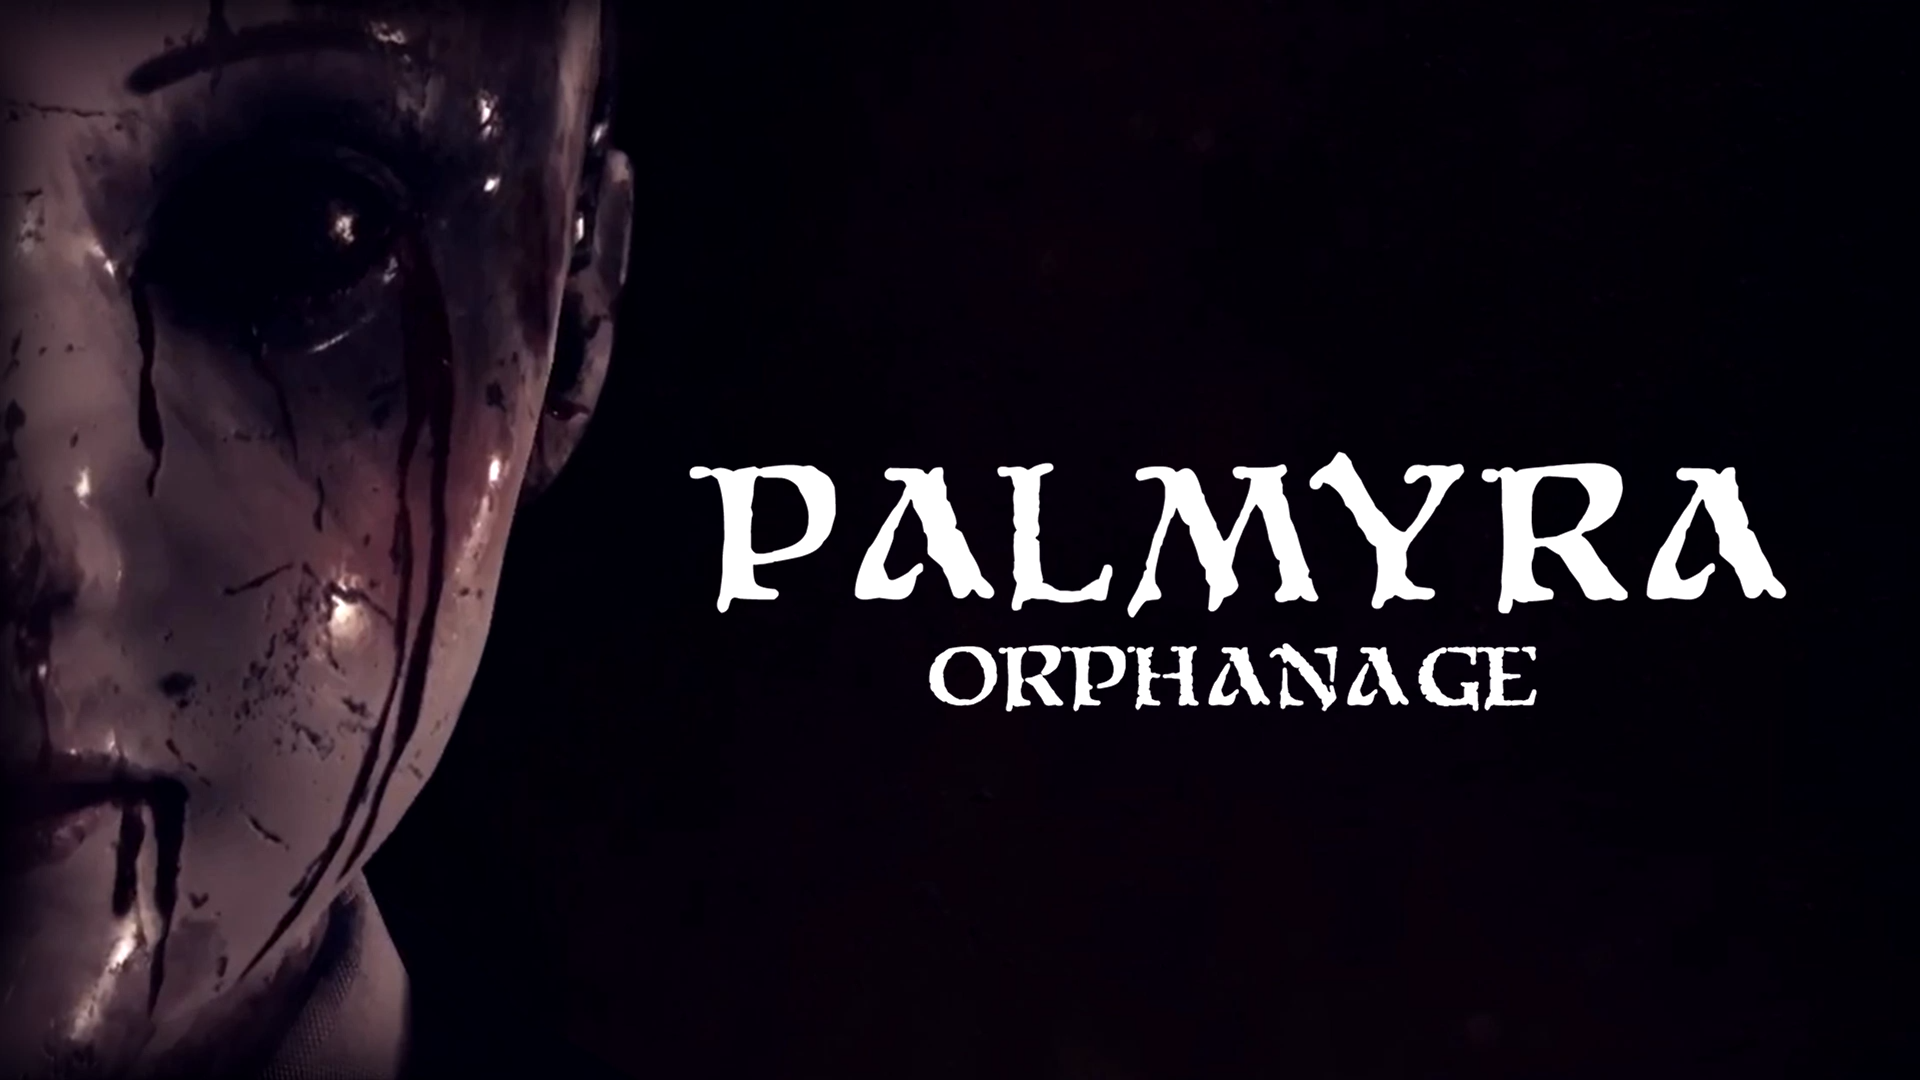 Let’s Play Palmyra Orphanage (Steam)